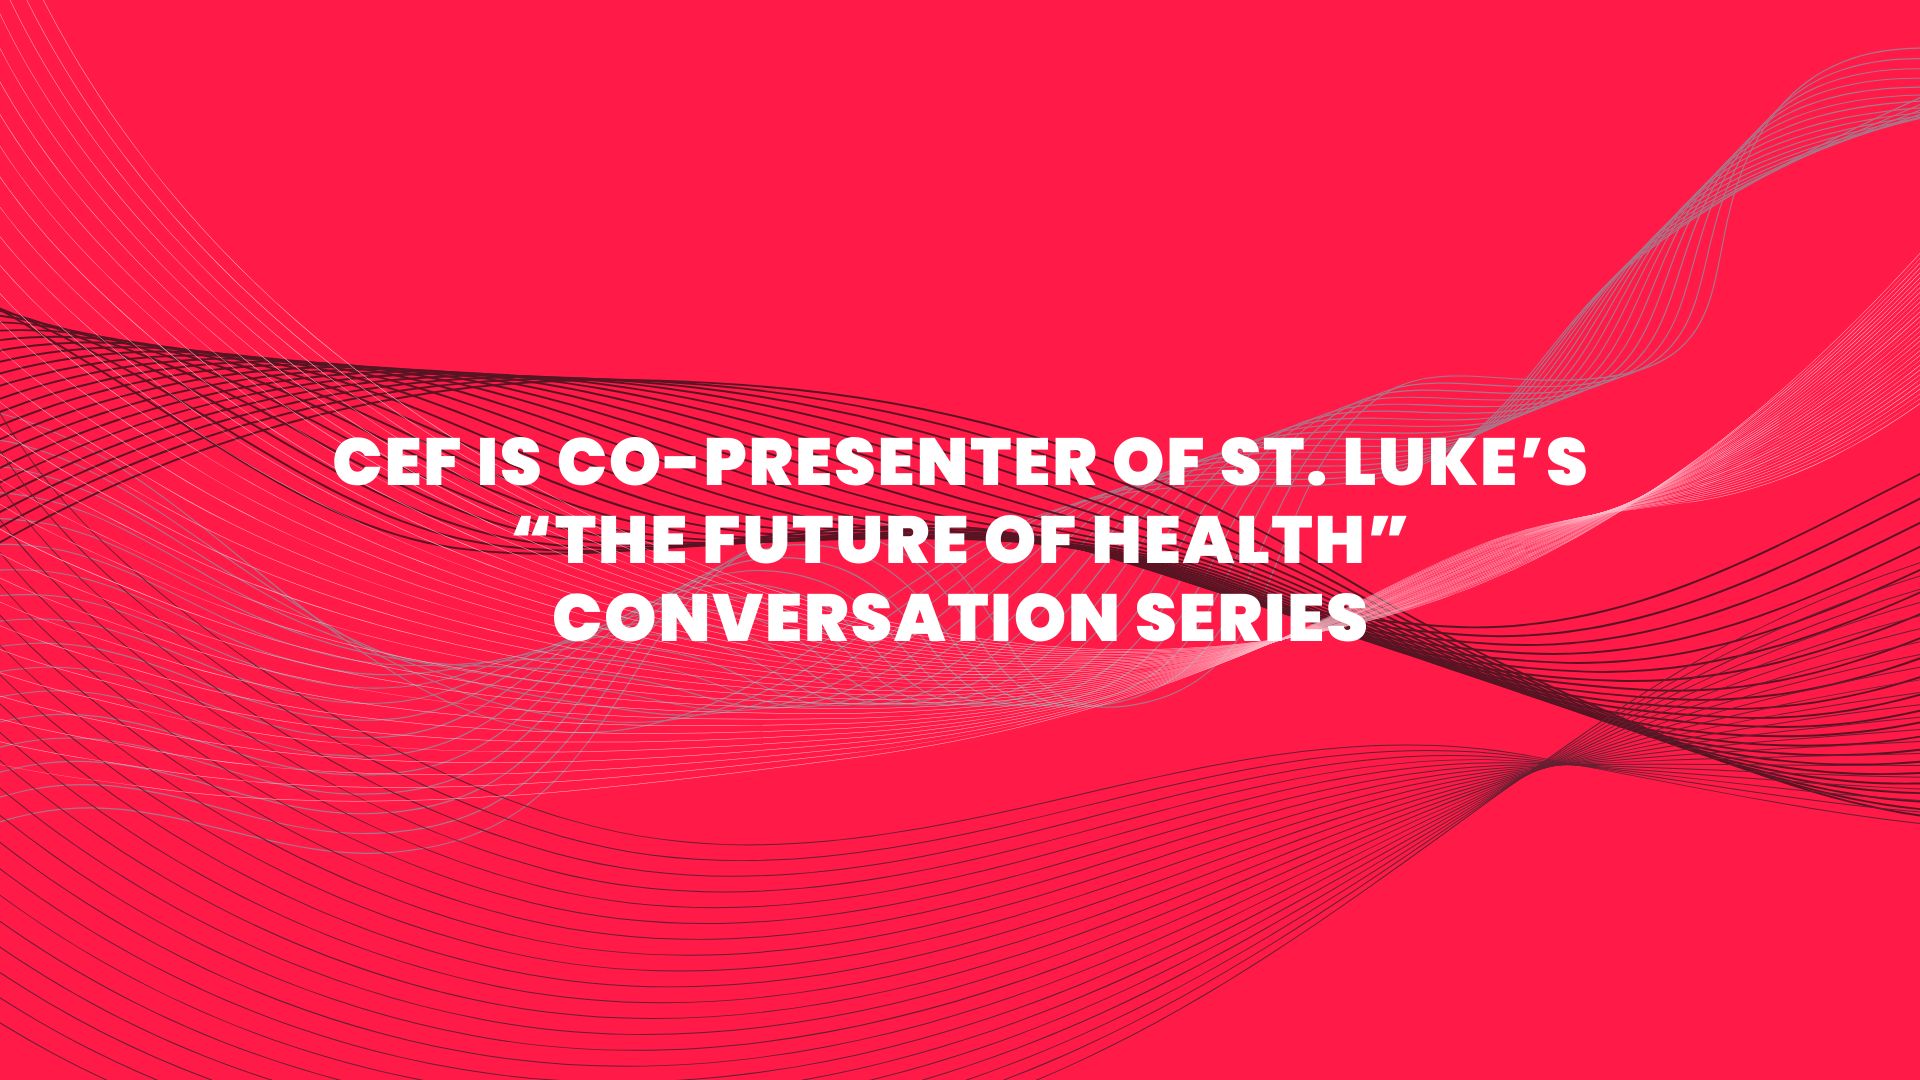 CEF is co-presenter of St. Luke’s “The Future of Health” Conversation Series